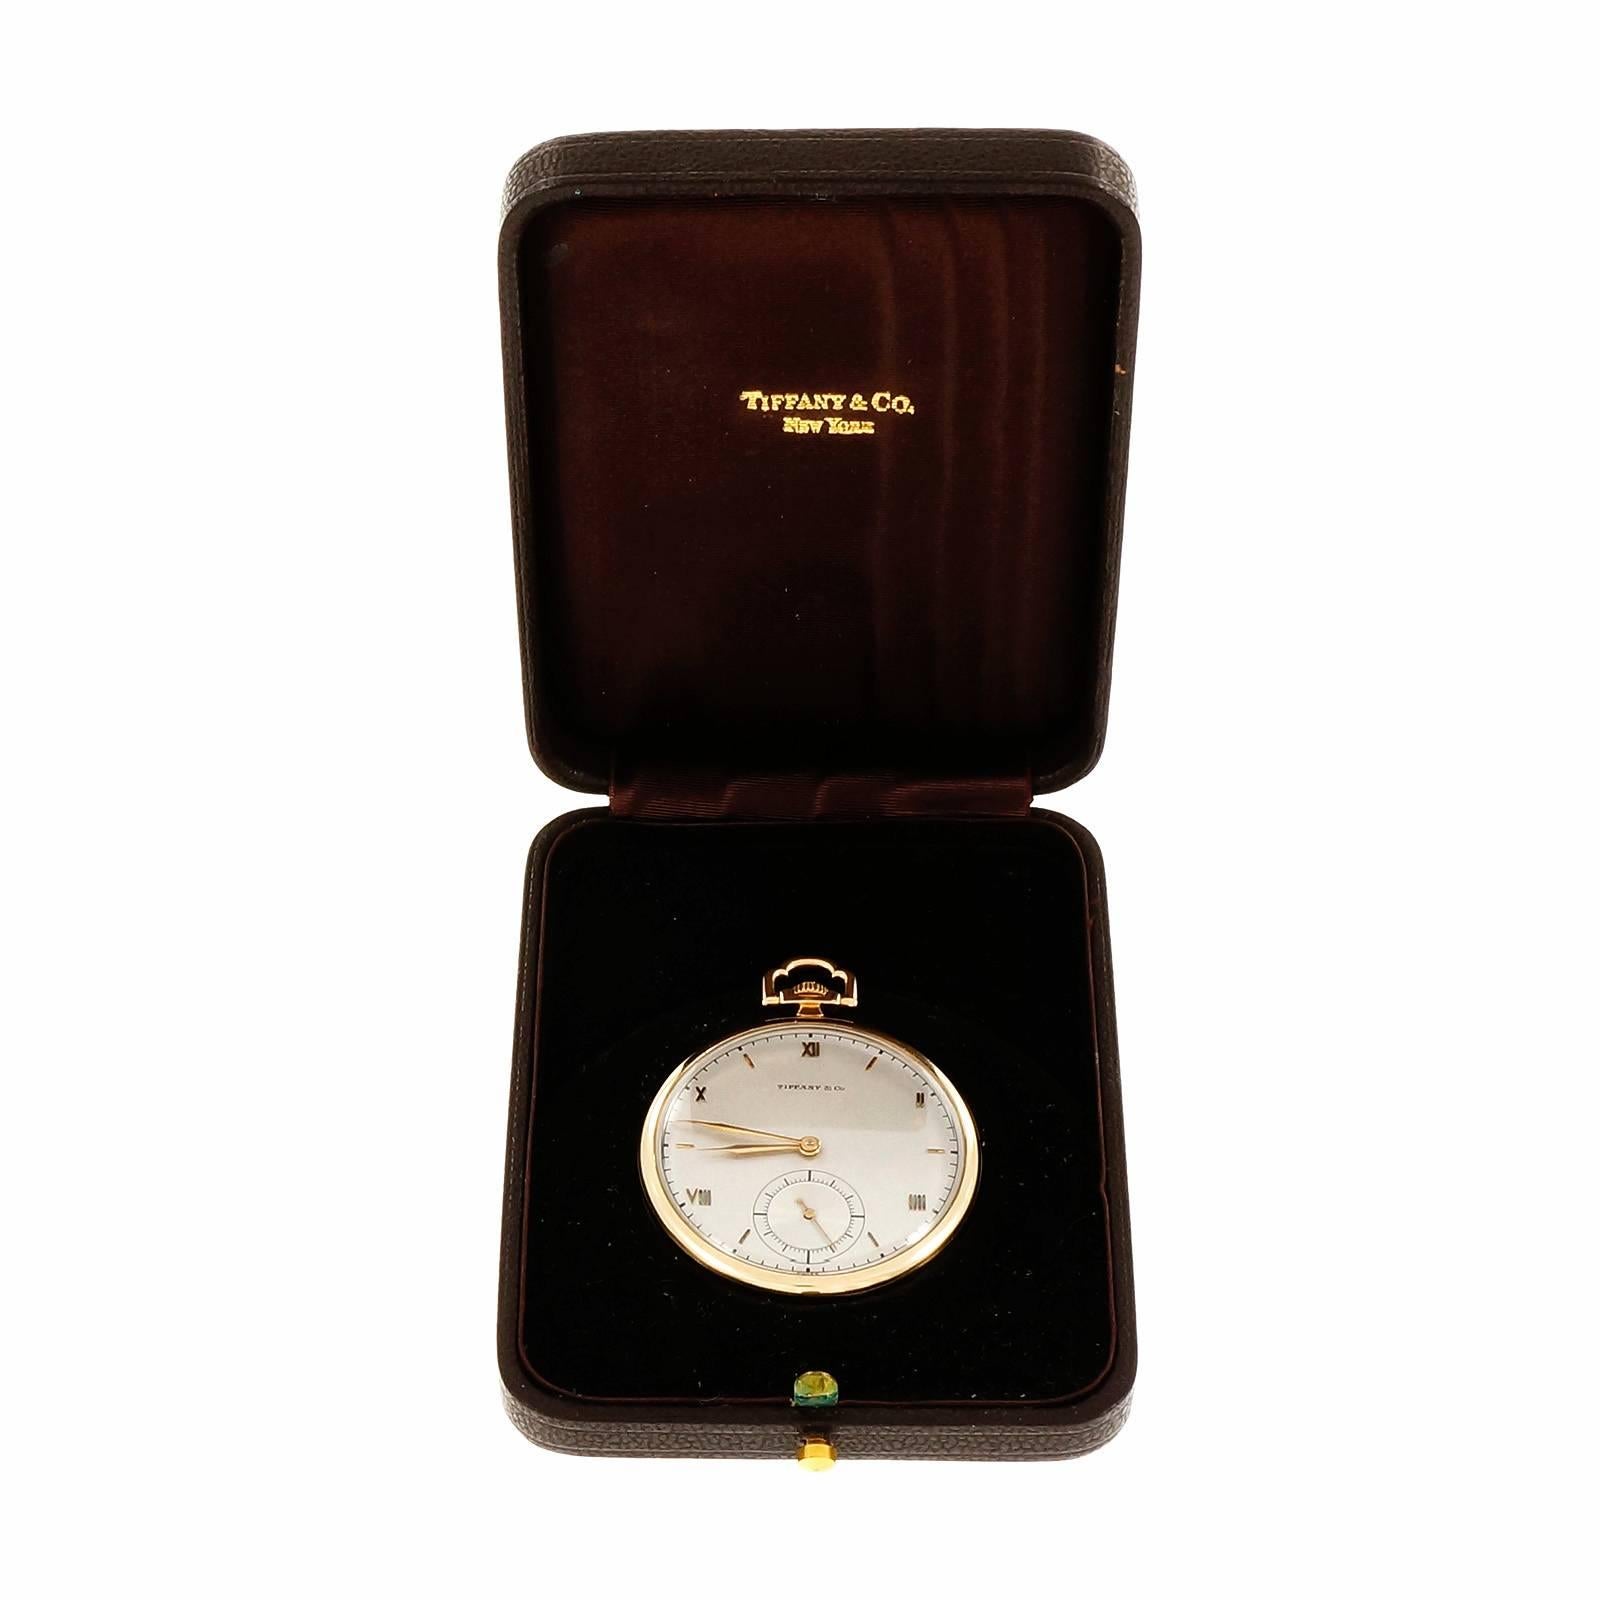 Tiffany & Co. Manual Wind yellow gold Open Face Pocket Watch 2